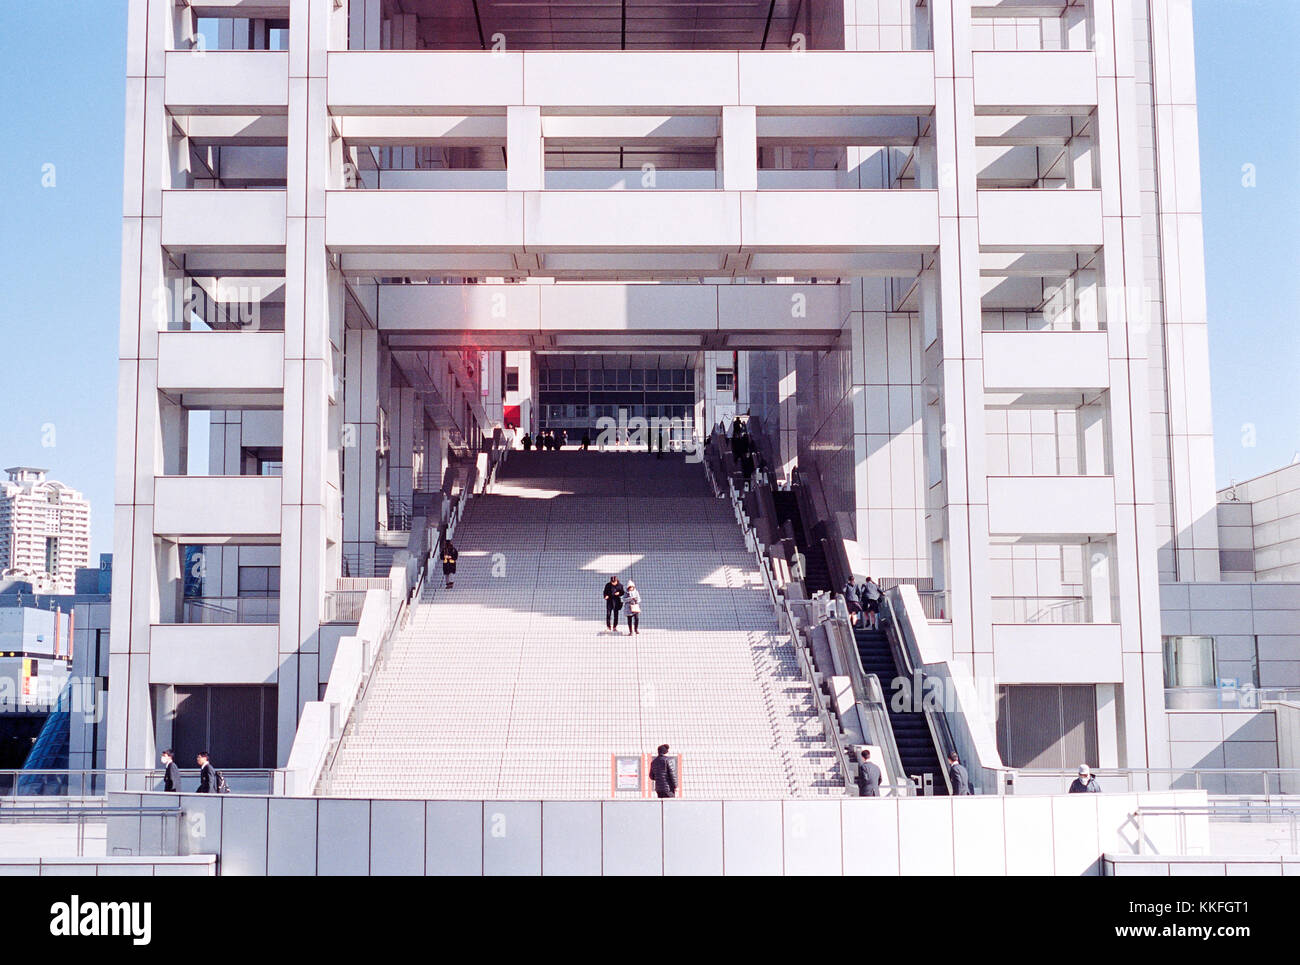 People walking up and down that staircase of the futuristic Fuji TV Building in Odaiba, Japan Stock Photo